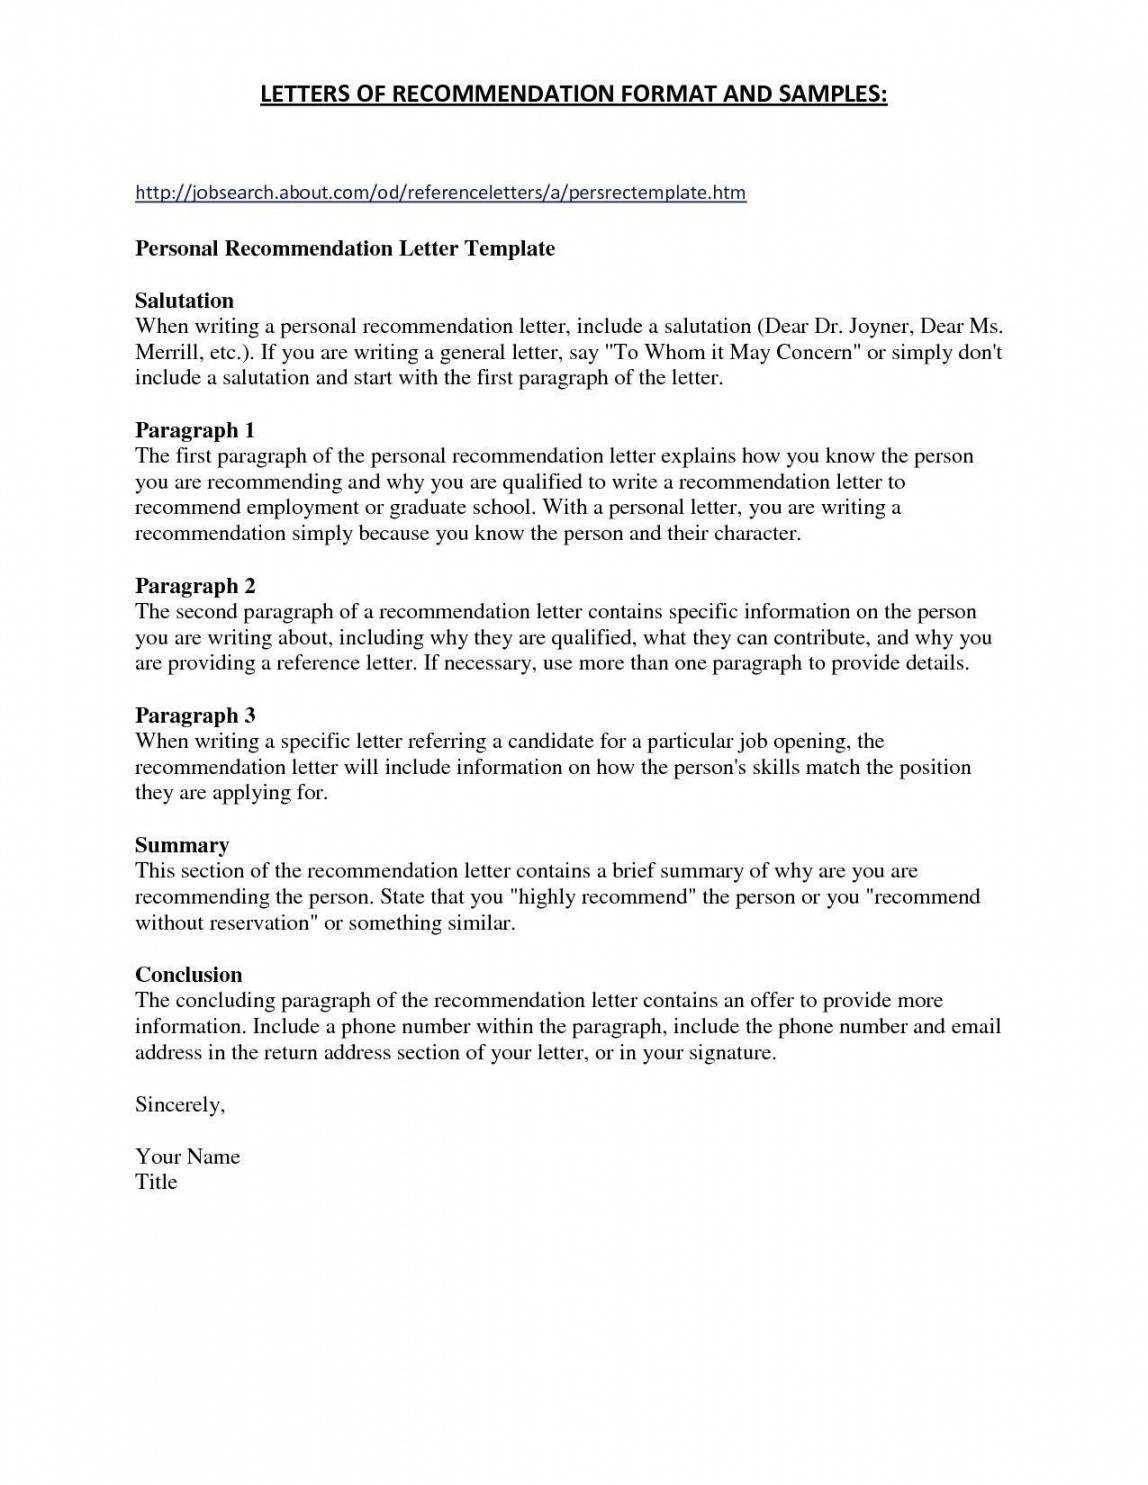 Sample Template For Letter Of Recommendation Collection In Recommendation Report Template